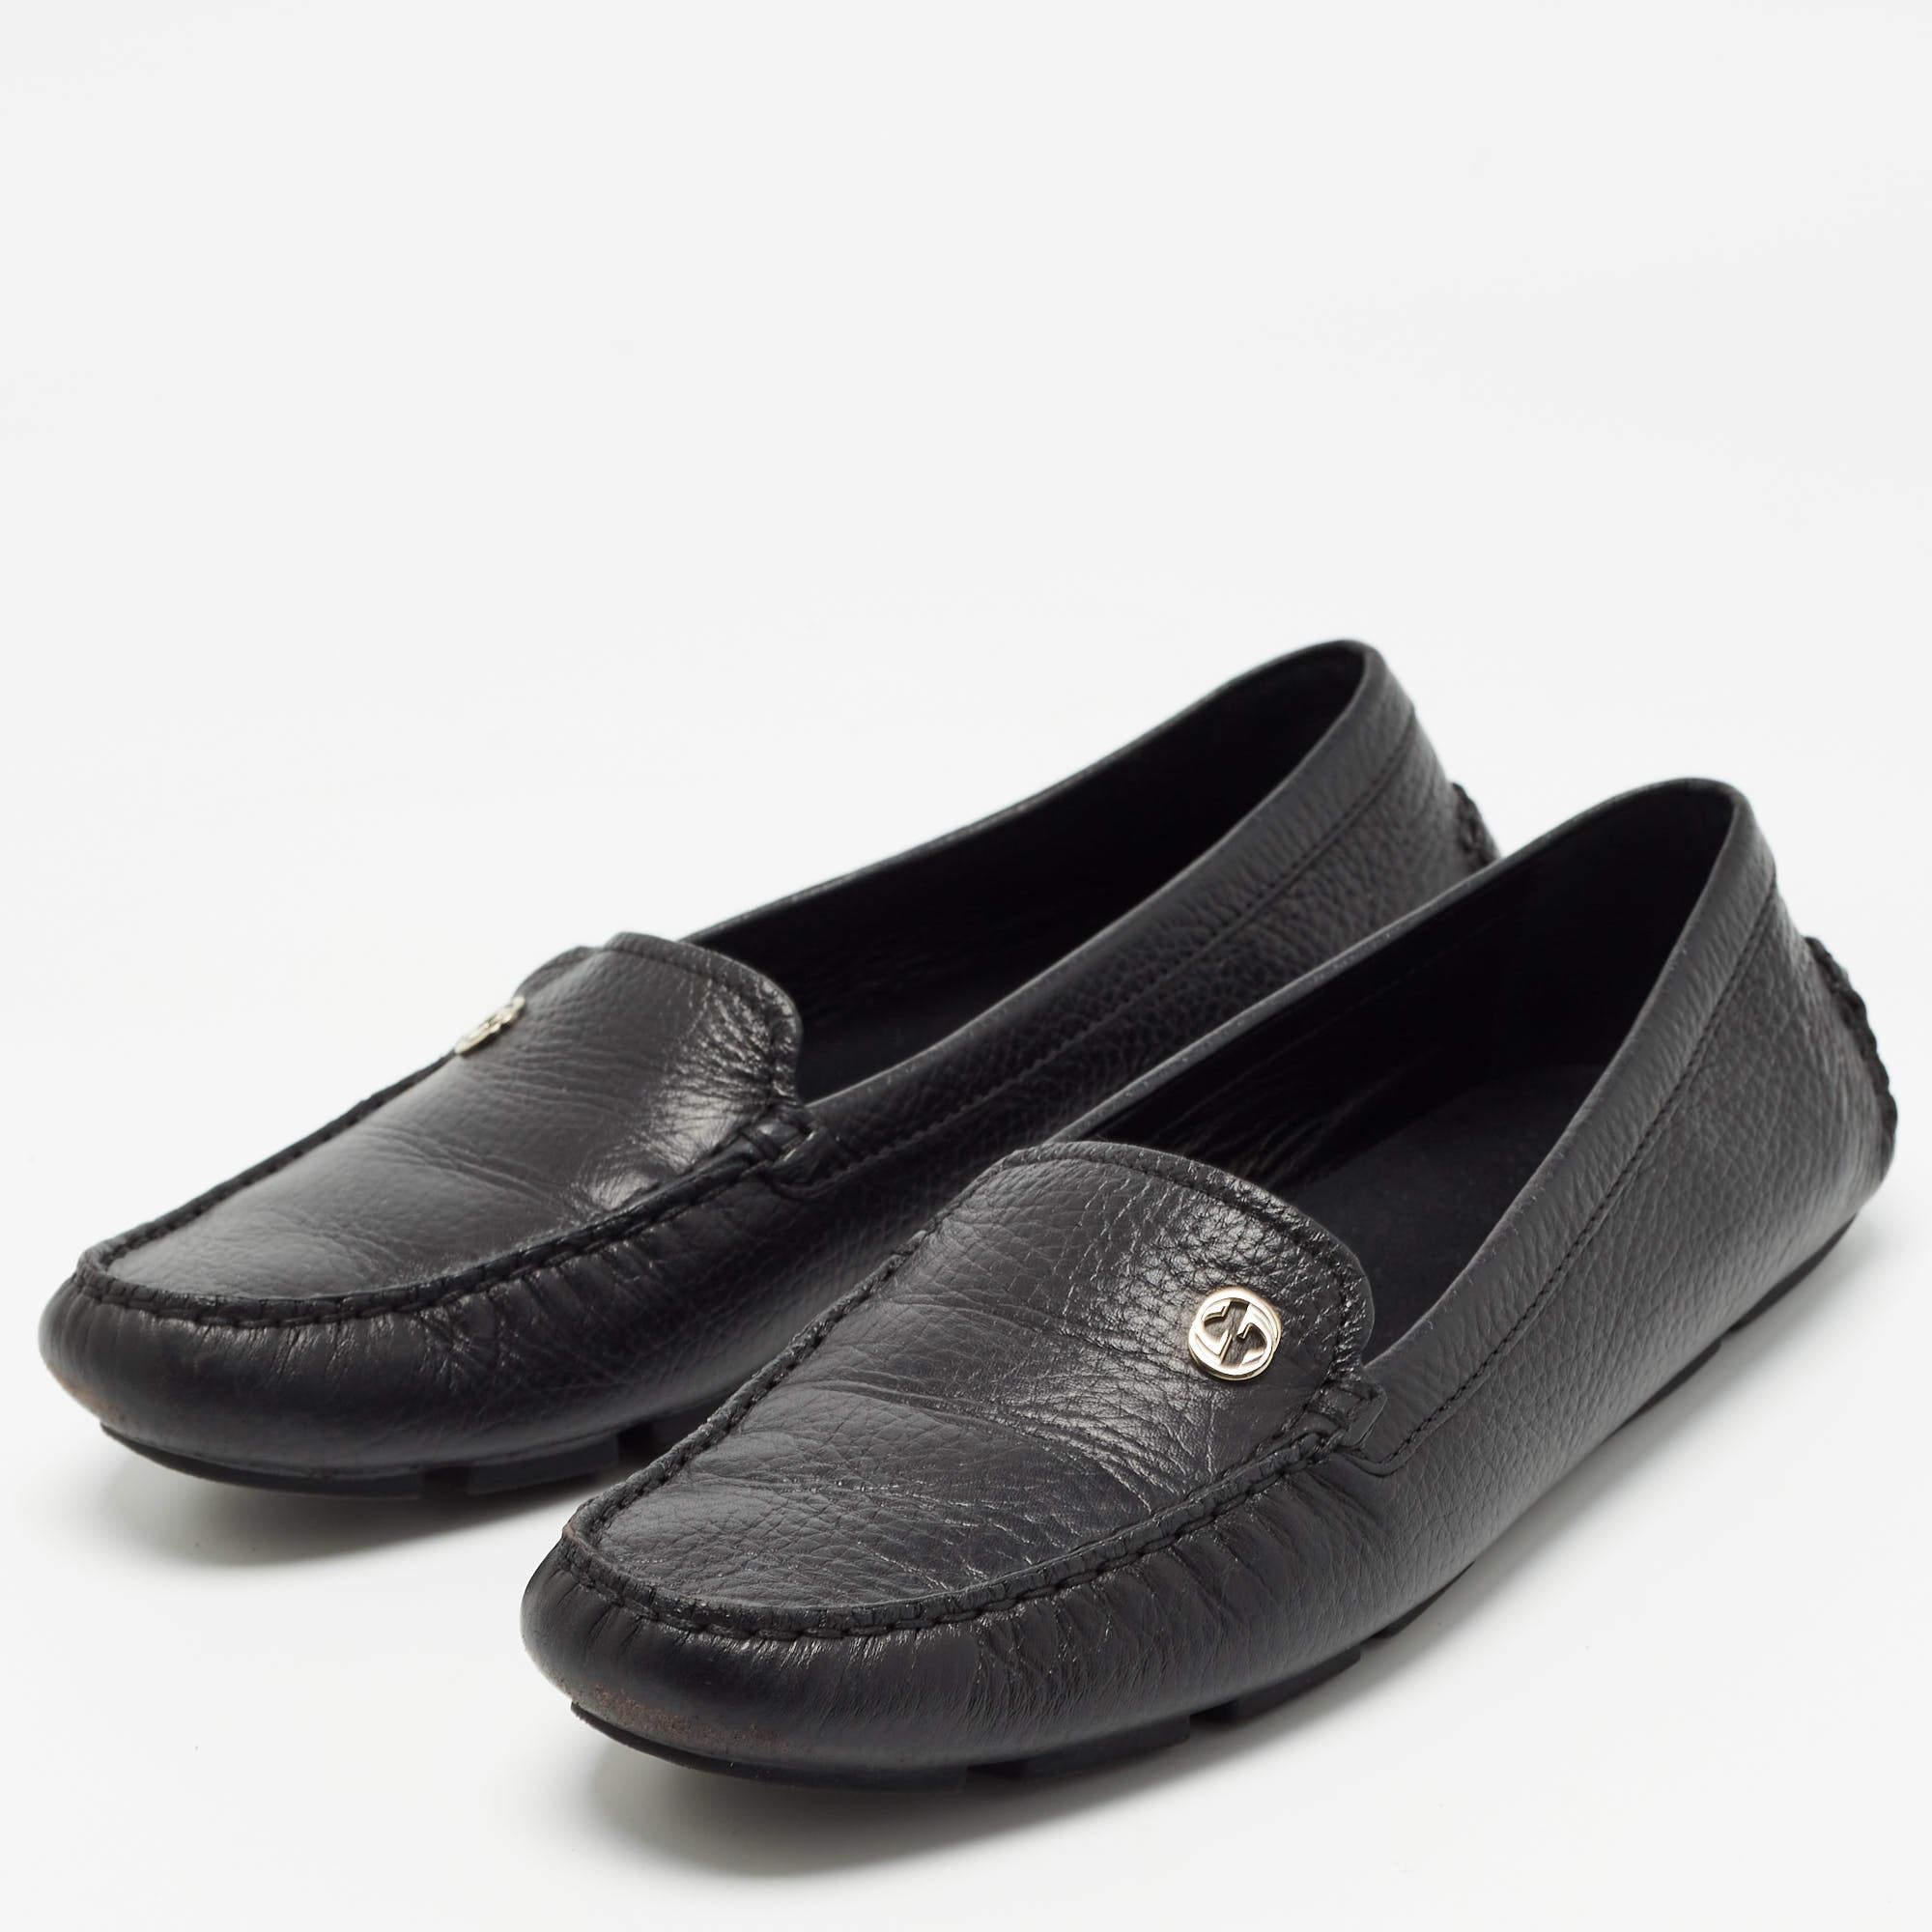 Gucci Black Leather Slip On Loafers Size 39 For Sale 4